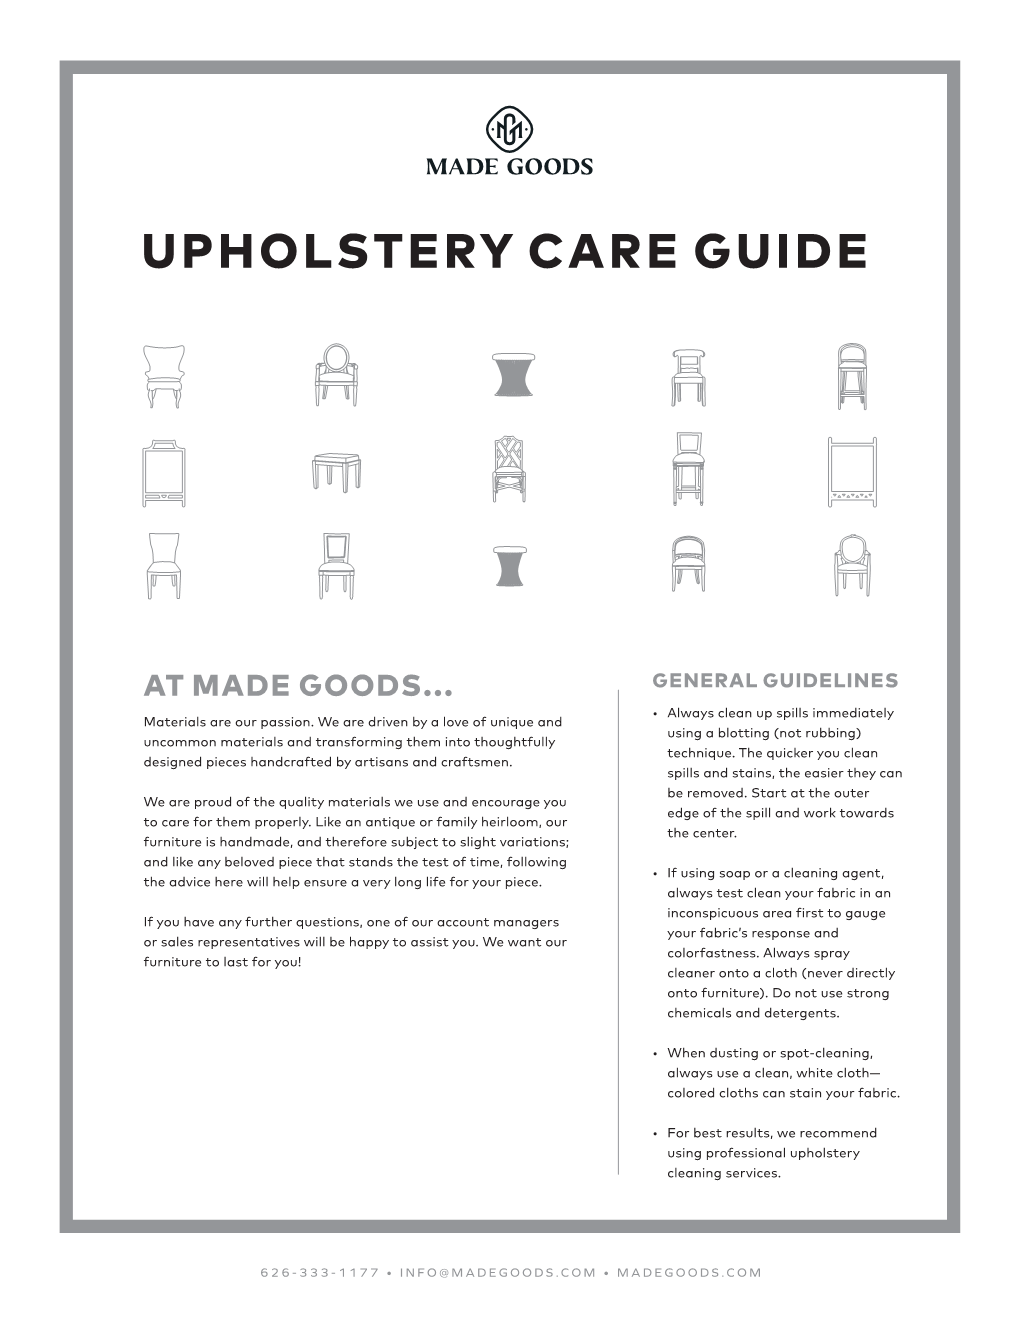 Upholstery Care Guide